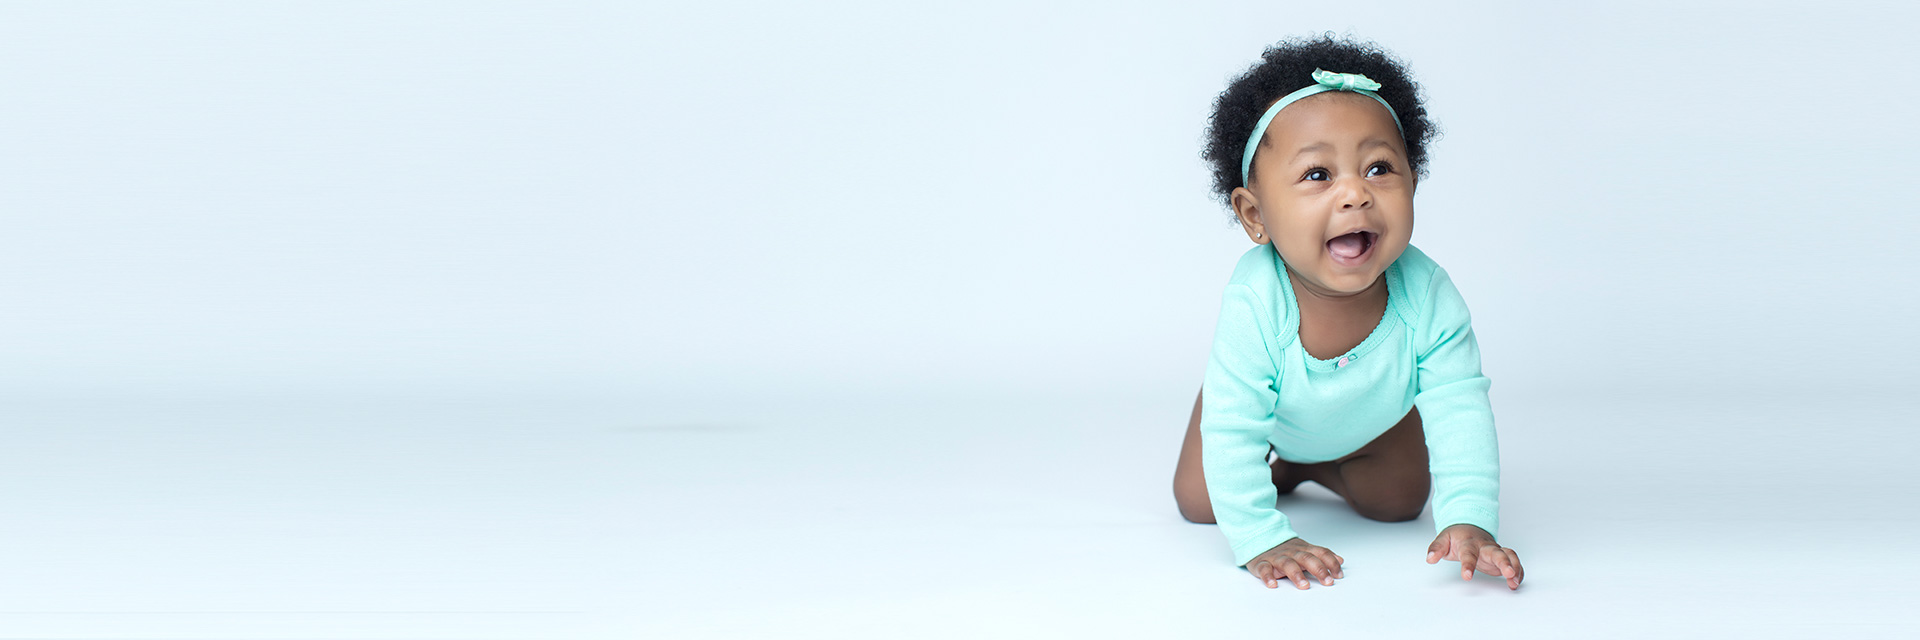 African American Baby in Teal Crawling on Floor